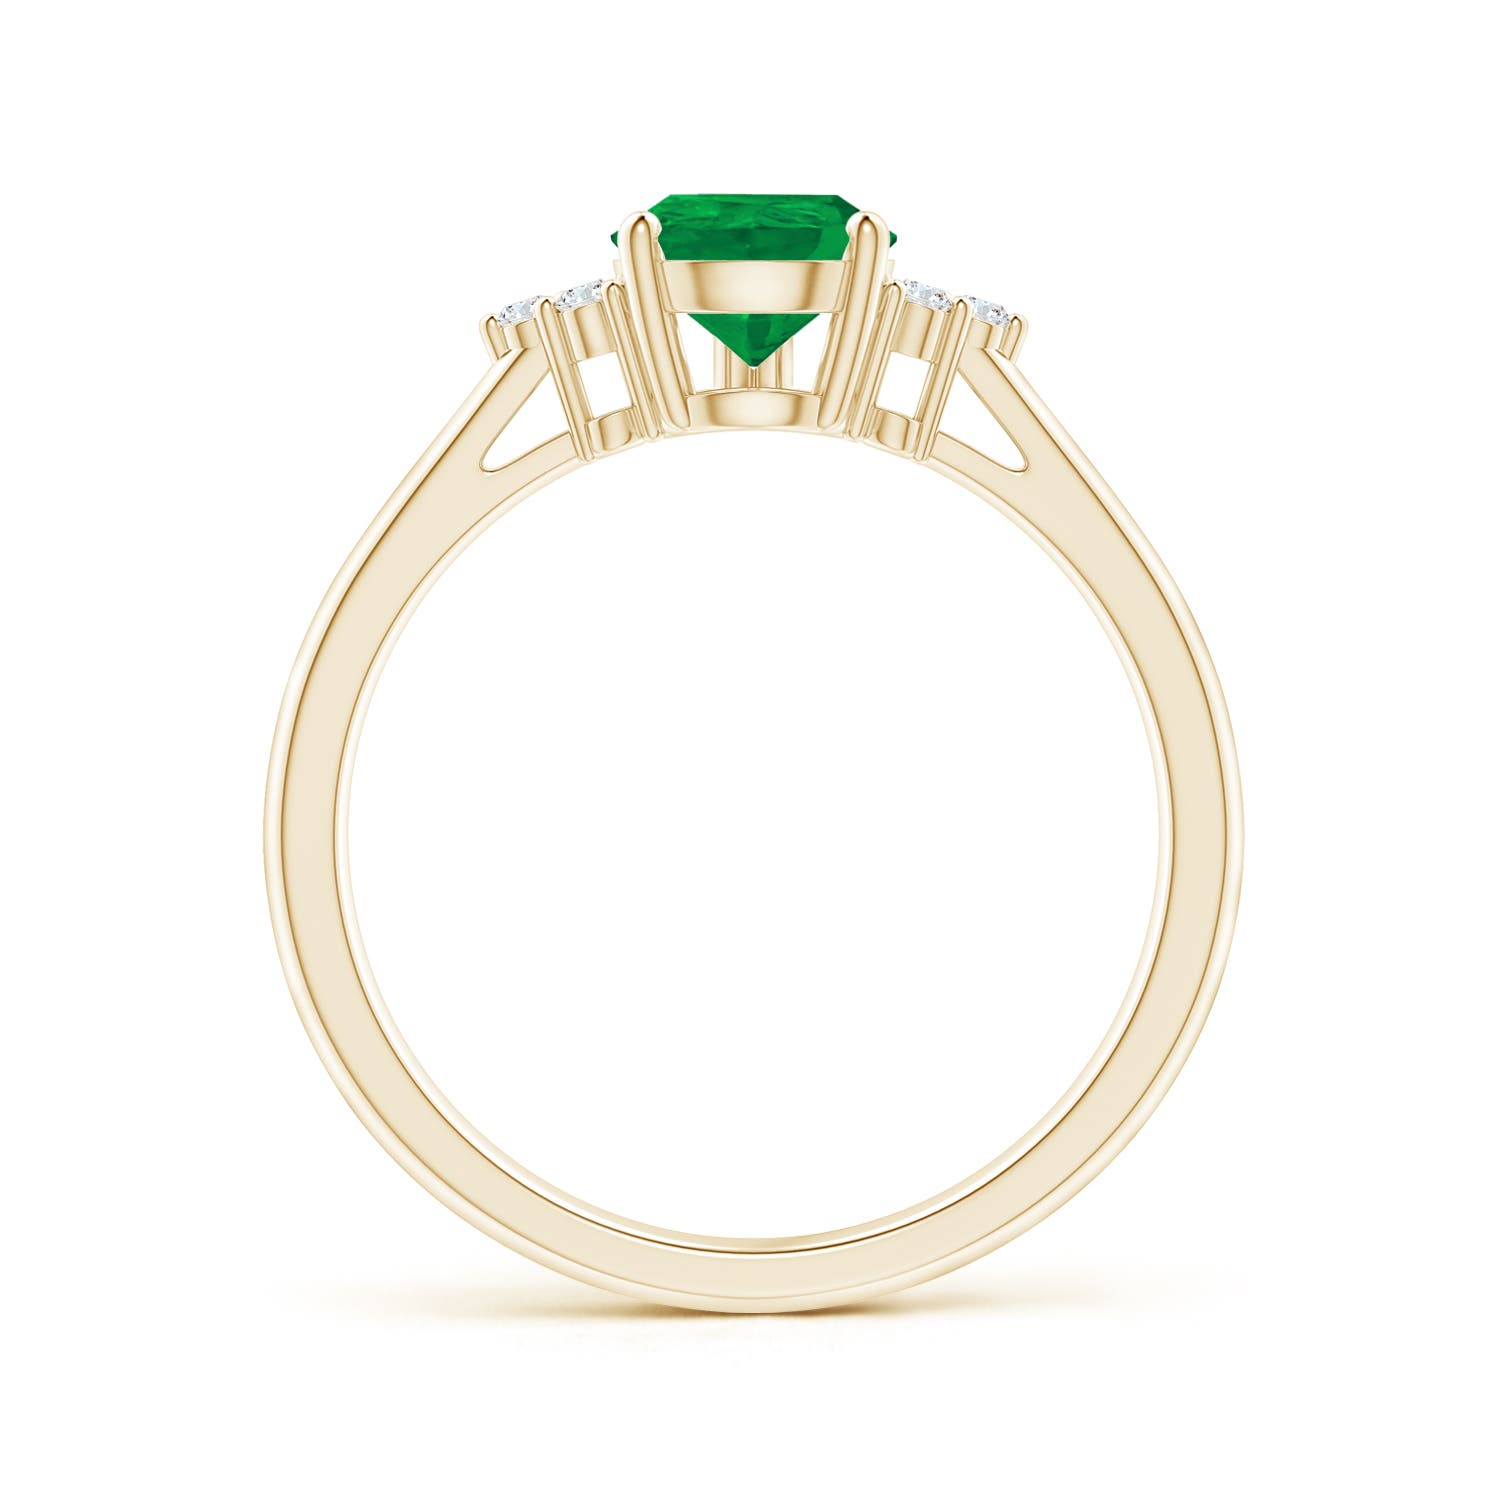 AA - Emerald / 1.02 CT / 14 KT Yellow Gold